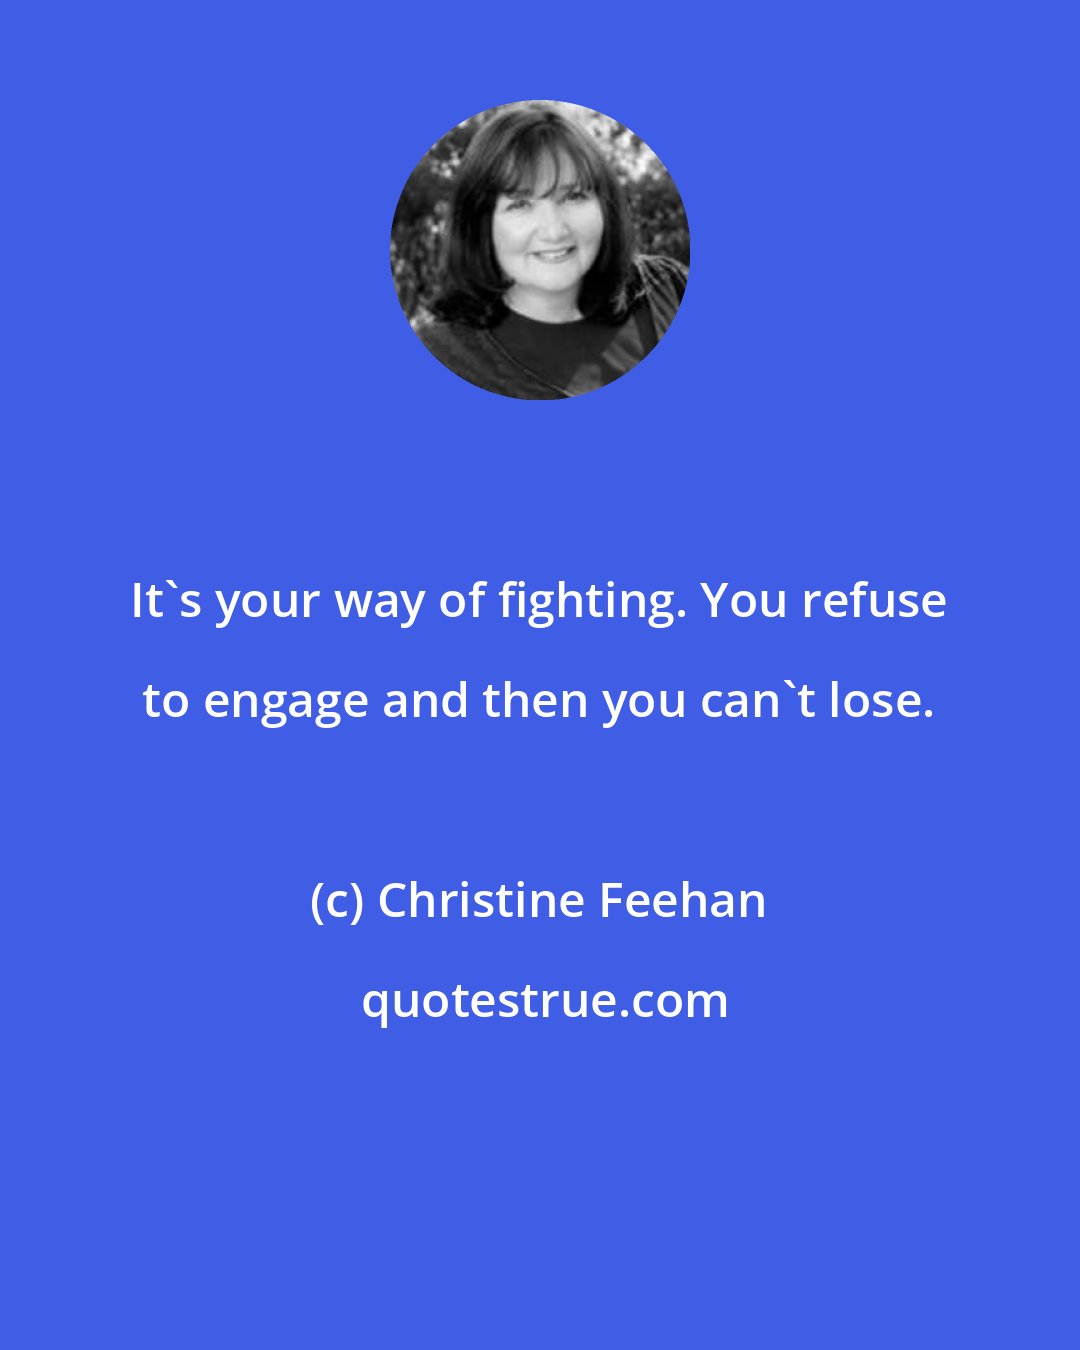 Christine Feehan: It's your way of fighting. You refuse to engage and then you can't lose.